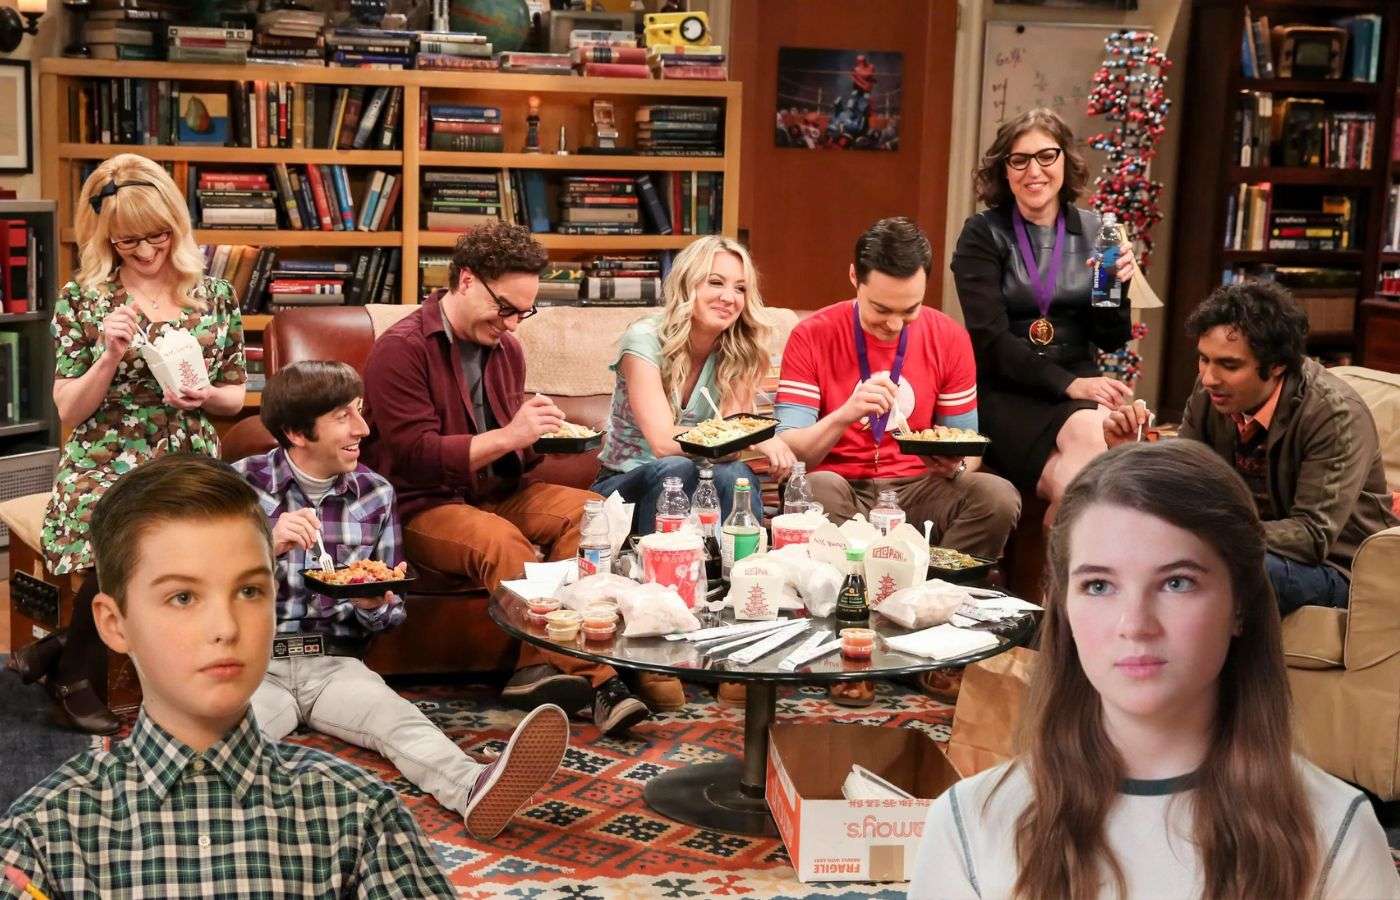 The cast of The Big Bang Theory with Sheldon and Missy from Young Sheldon.